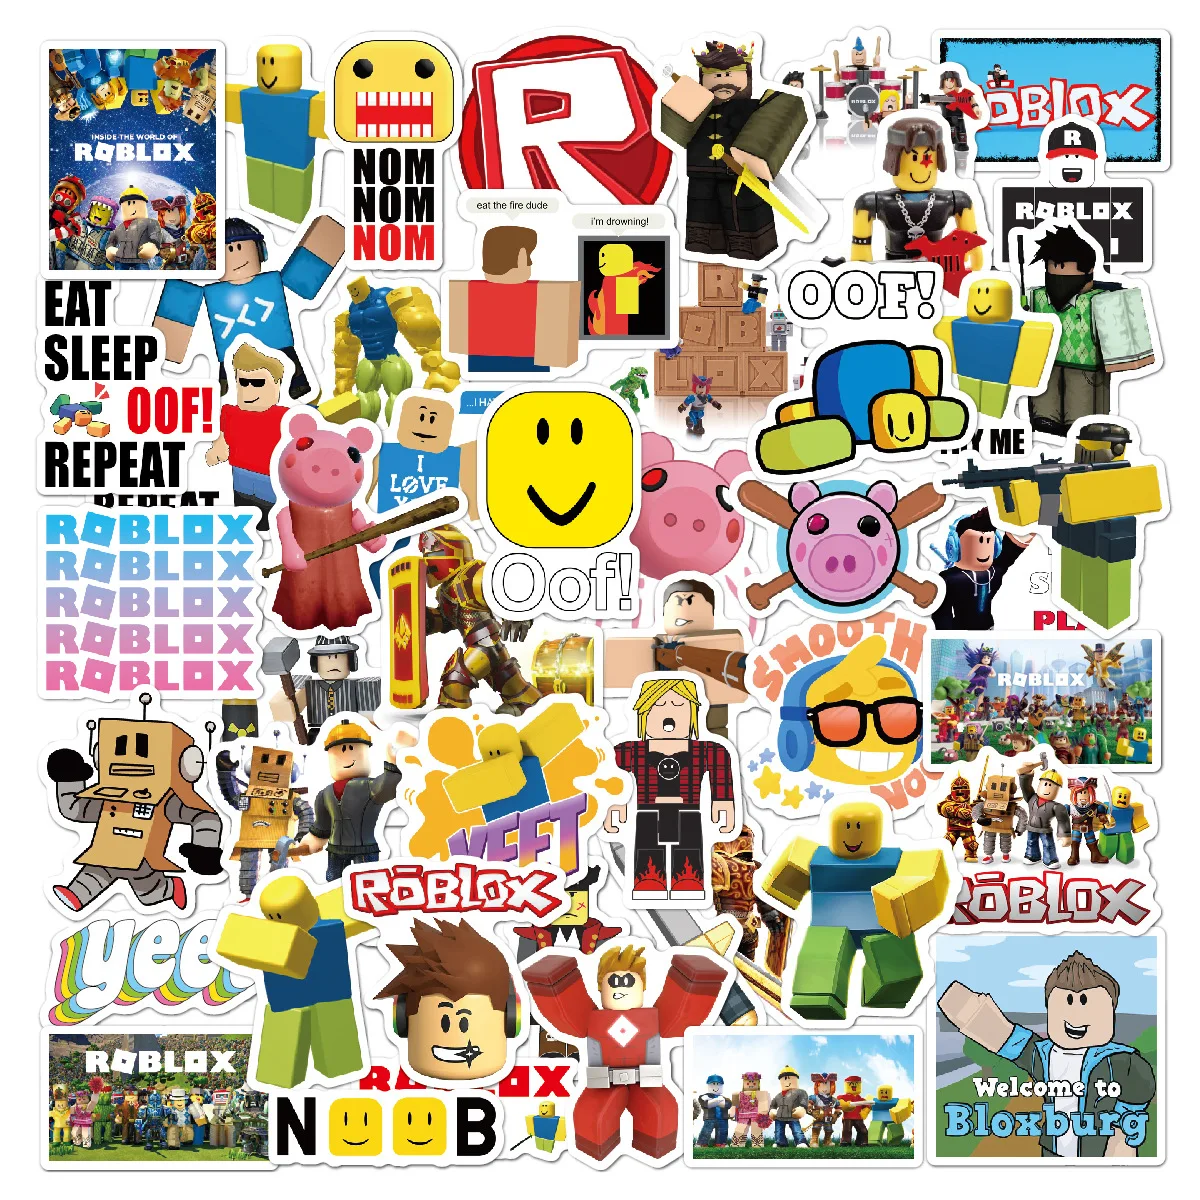 50pcs Game Roblox Laptop Stickers Cartoon Waterproof Vinyl Stickers For Kids Cars Motorcycle Skateboard Laptop Anime Sticker Buy Laptop Anime Sticker Roblox Laptop Stickers Game Stickers Product On Alibaba Com - bc skateboard roblox